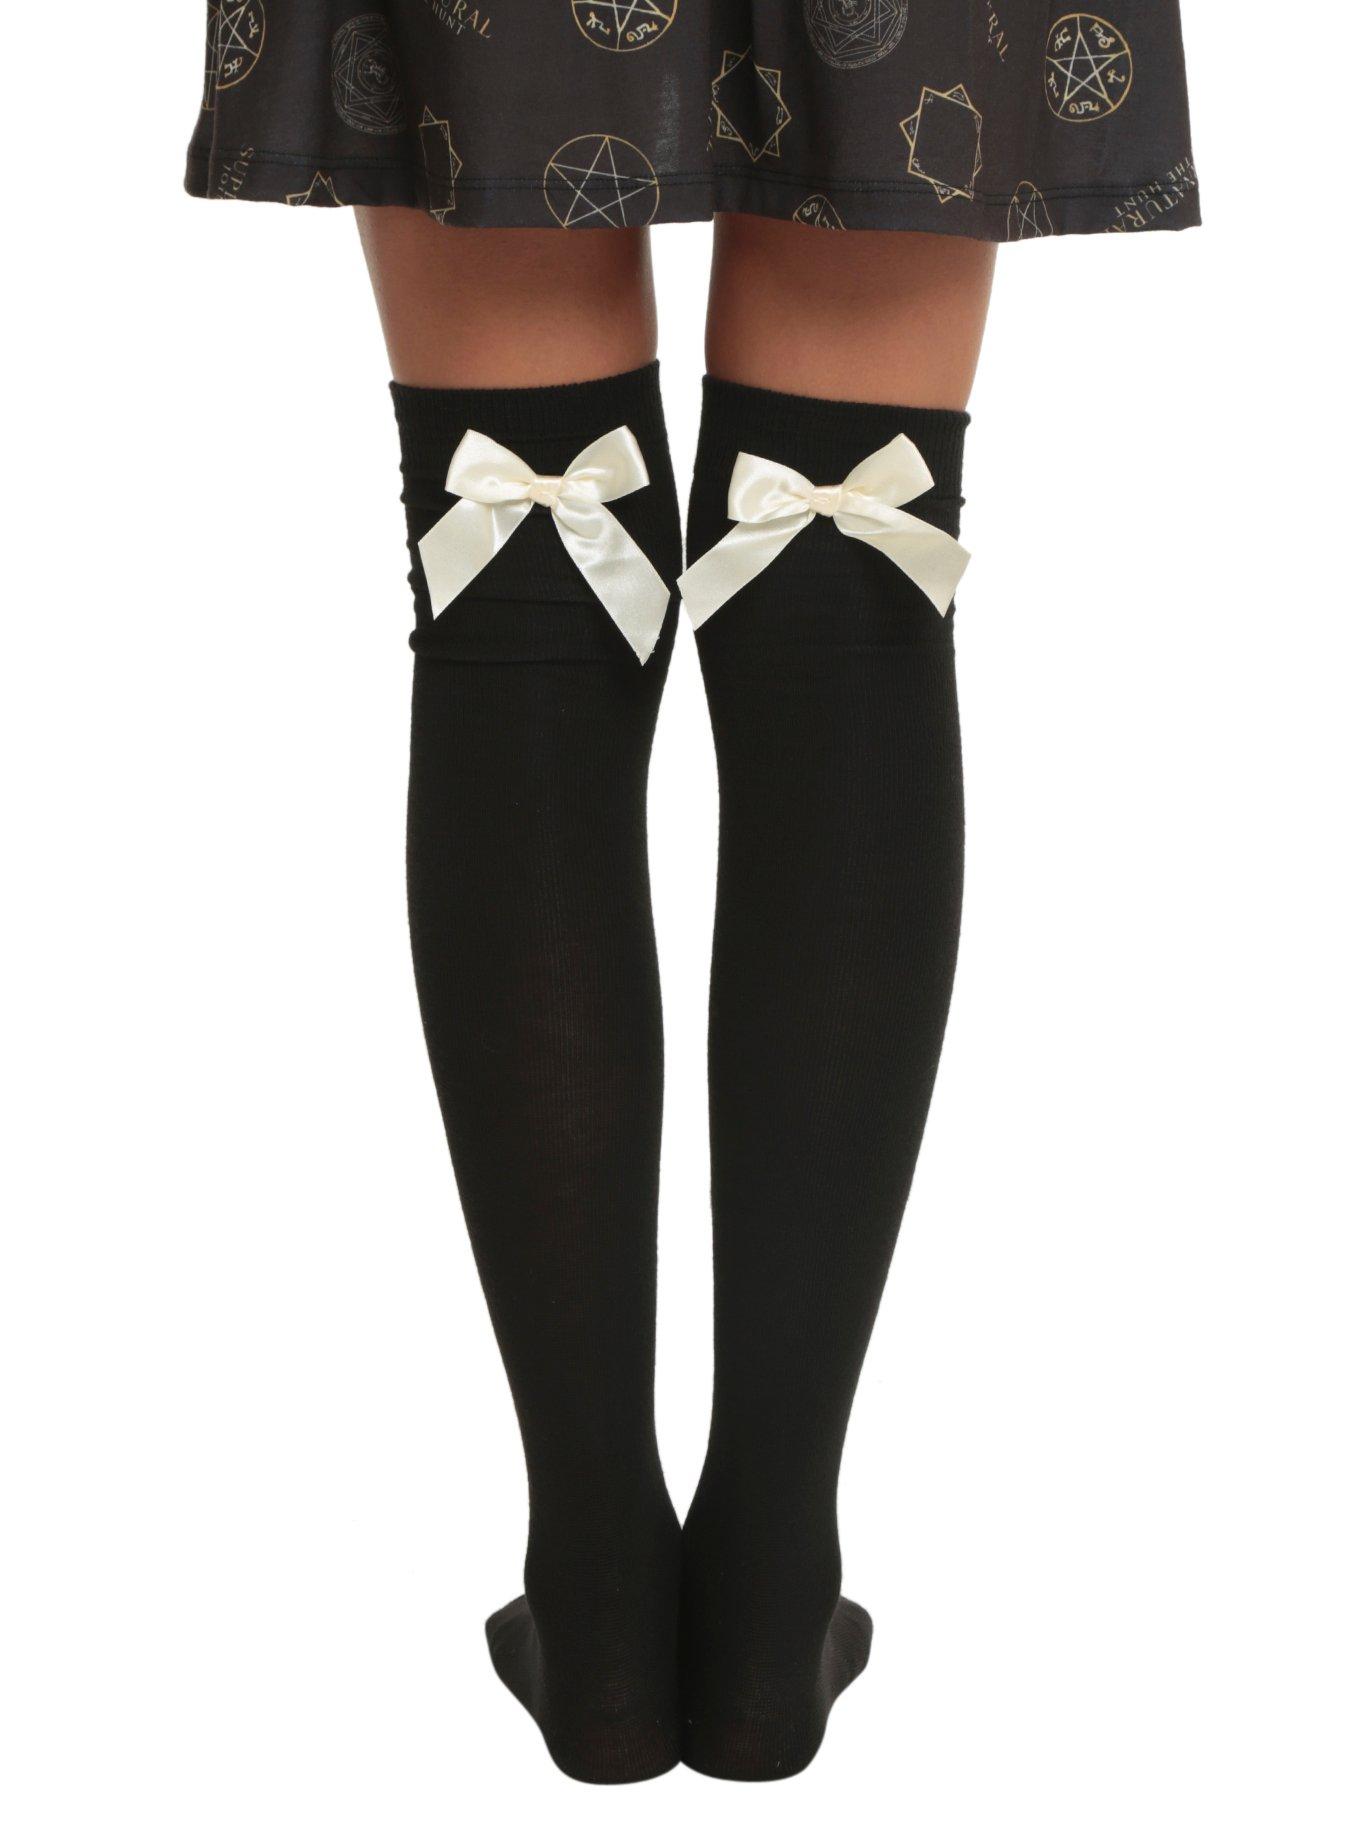 LOVEsick Black And Ivory Bow Over-The-Knee Socks | Hot Topic